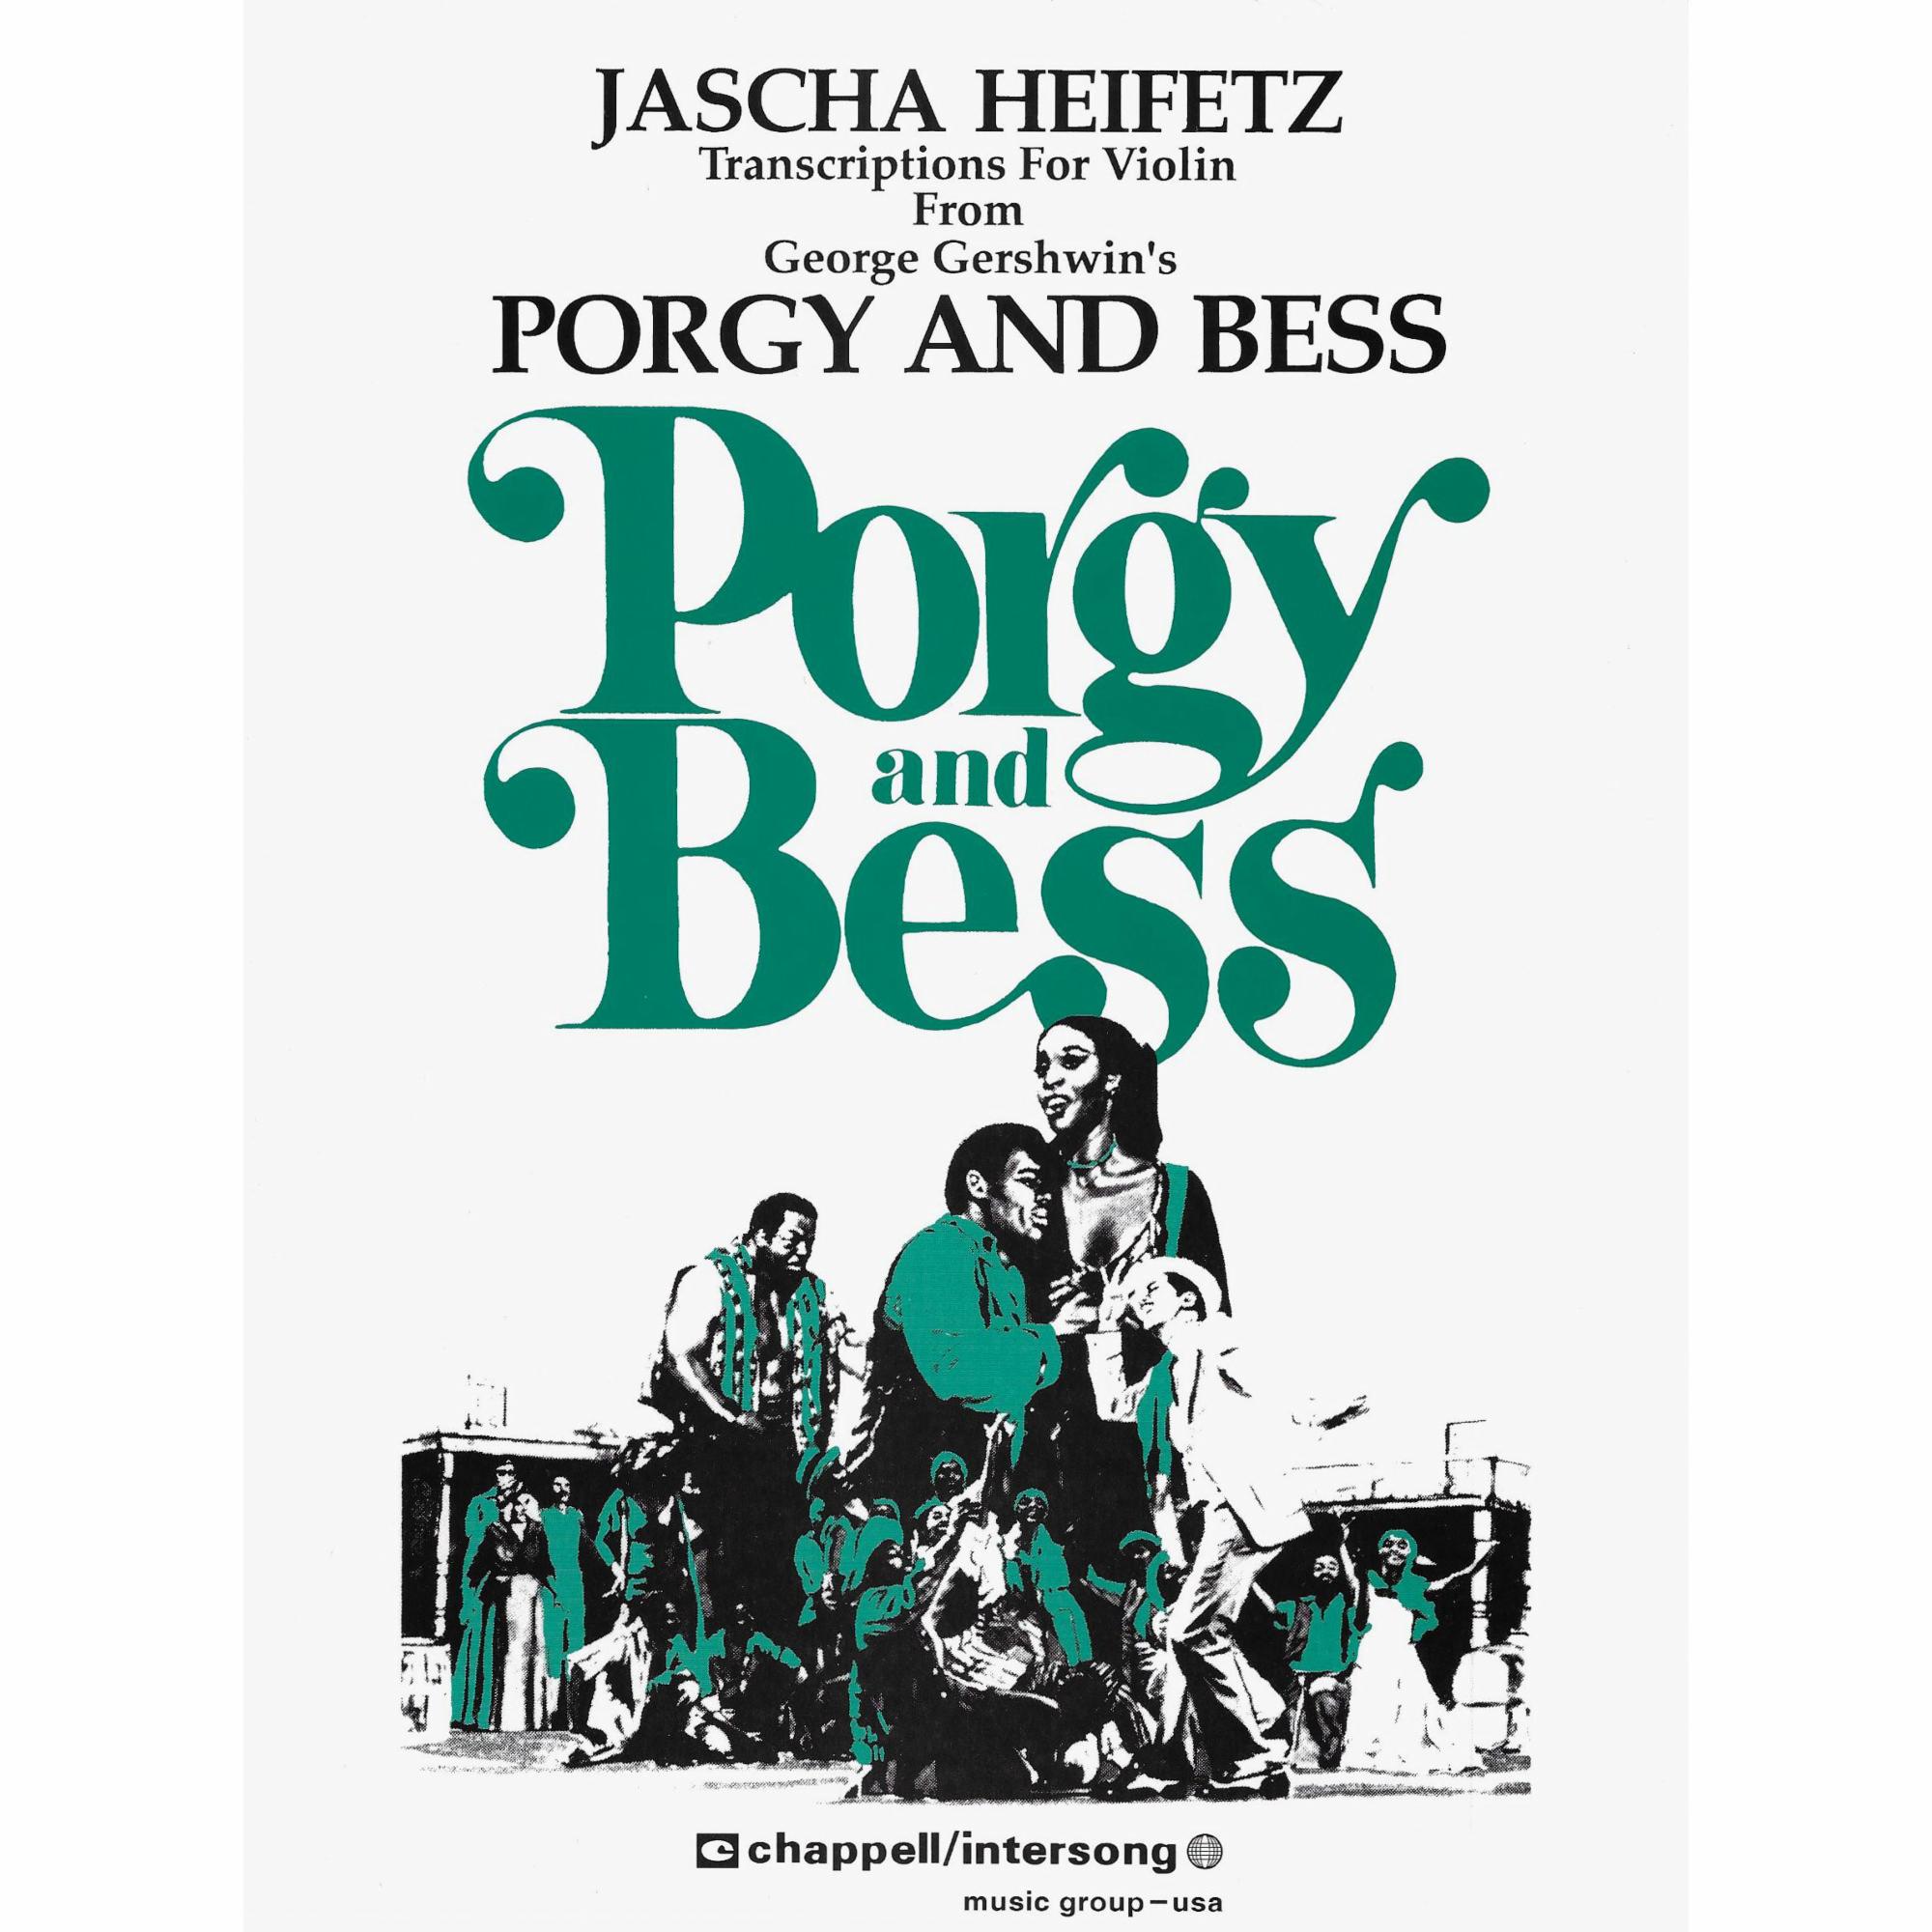 Selections from Porgy and Bess for Violin and Piano